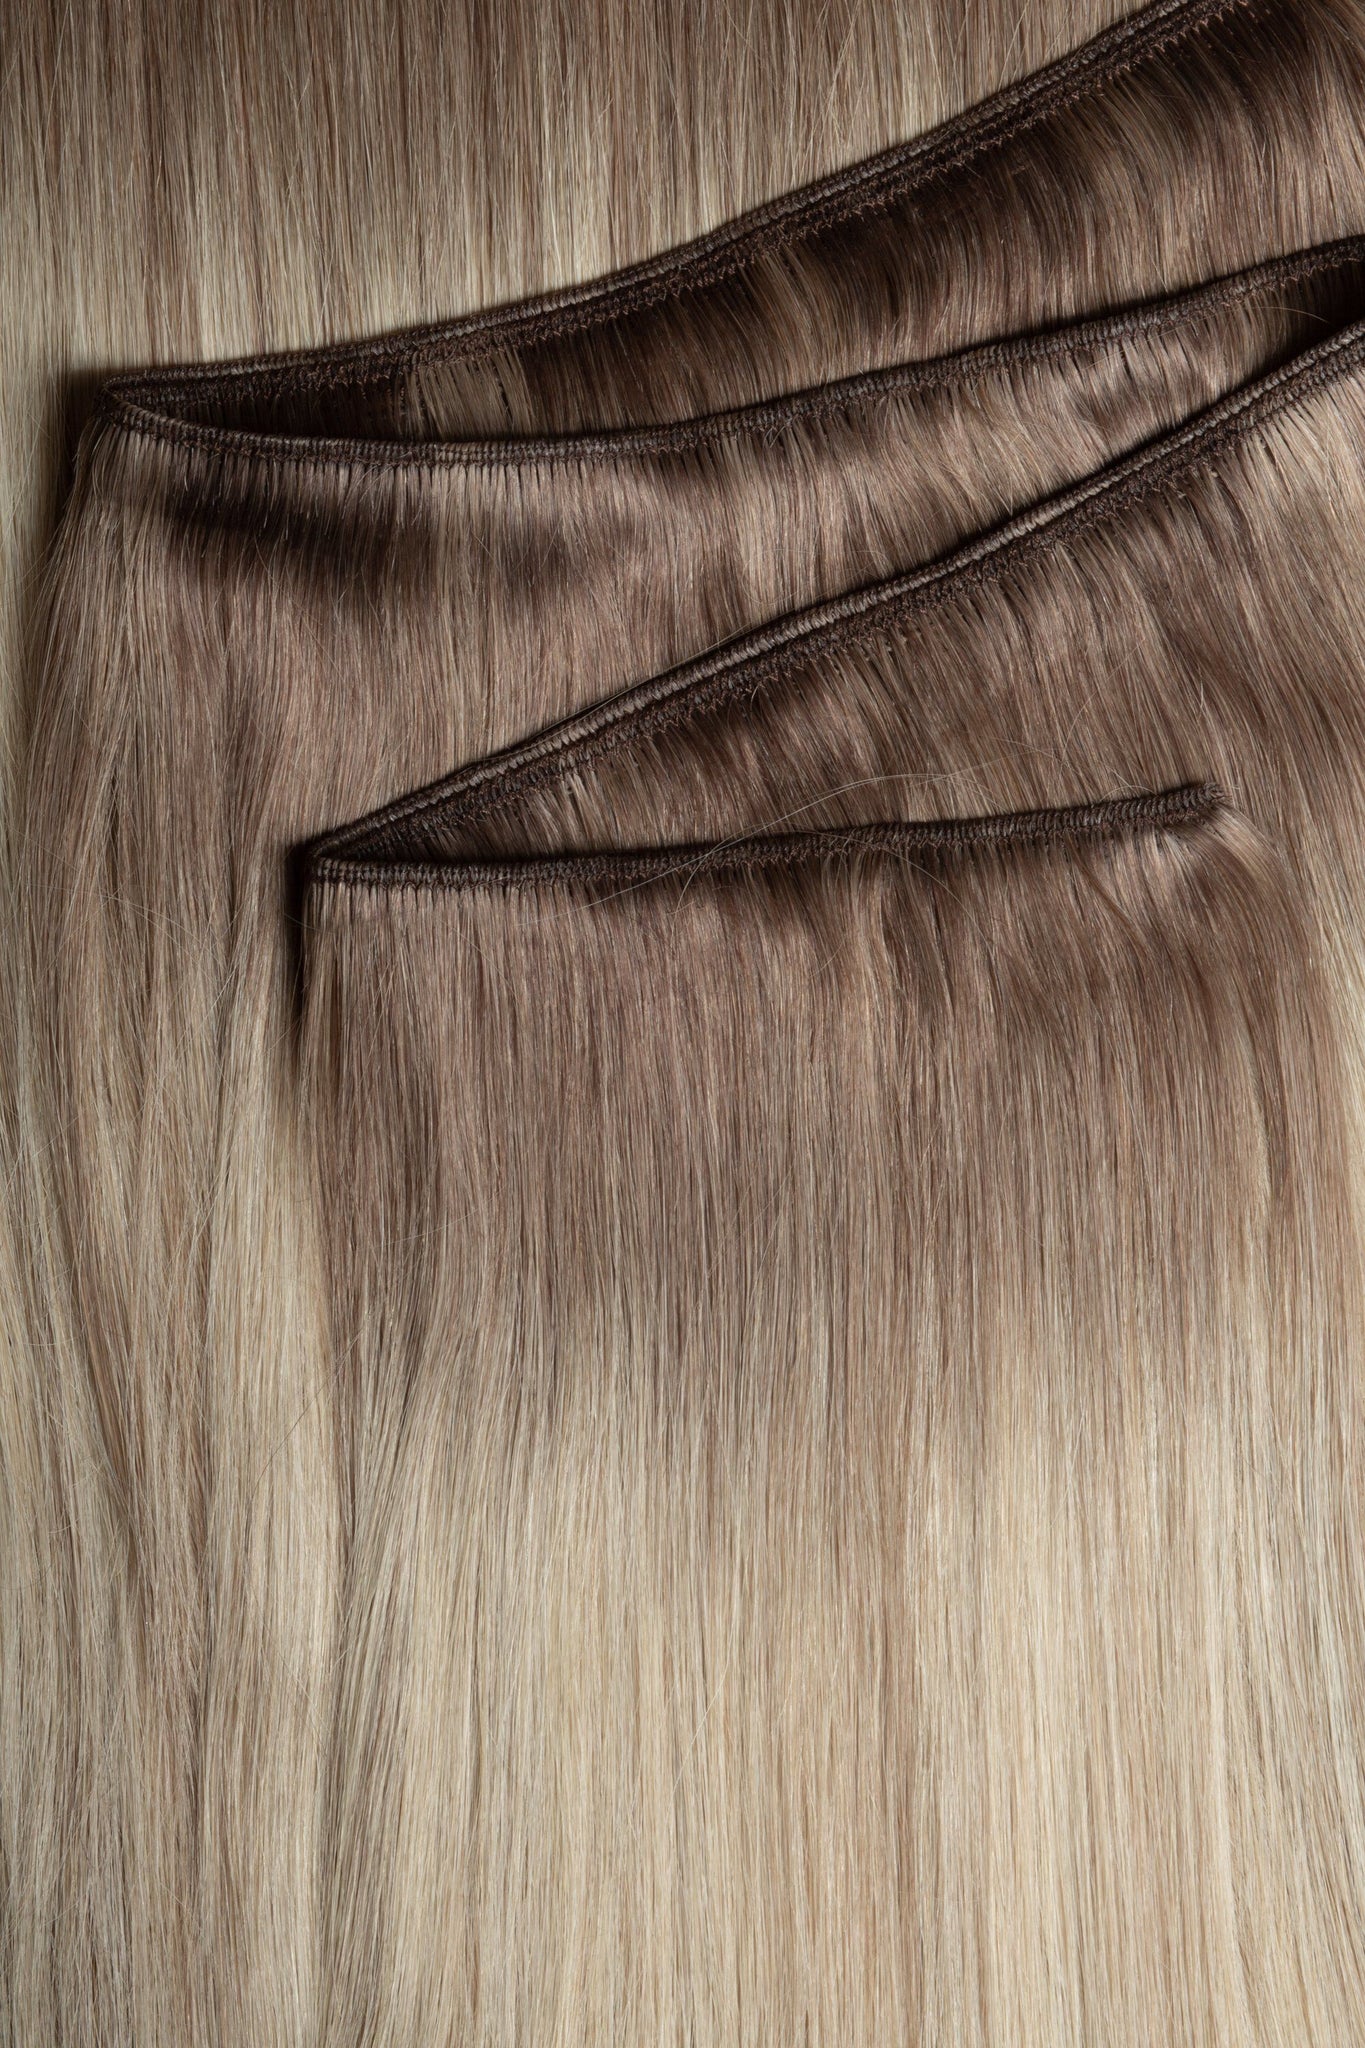 West Label Hair Extensions. Pure Russian remy Hair, Professional hair extensions. Clip-in. tale-in weft, sew-in, keratin tip. Best brand of hair extensions. Lasts 12 months, shiny hair, smooth hair, top hair extension brand. Balayage extensions, ombre 